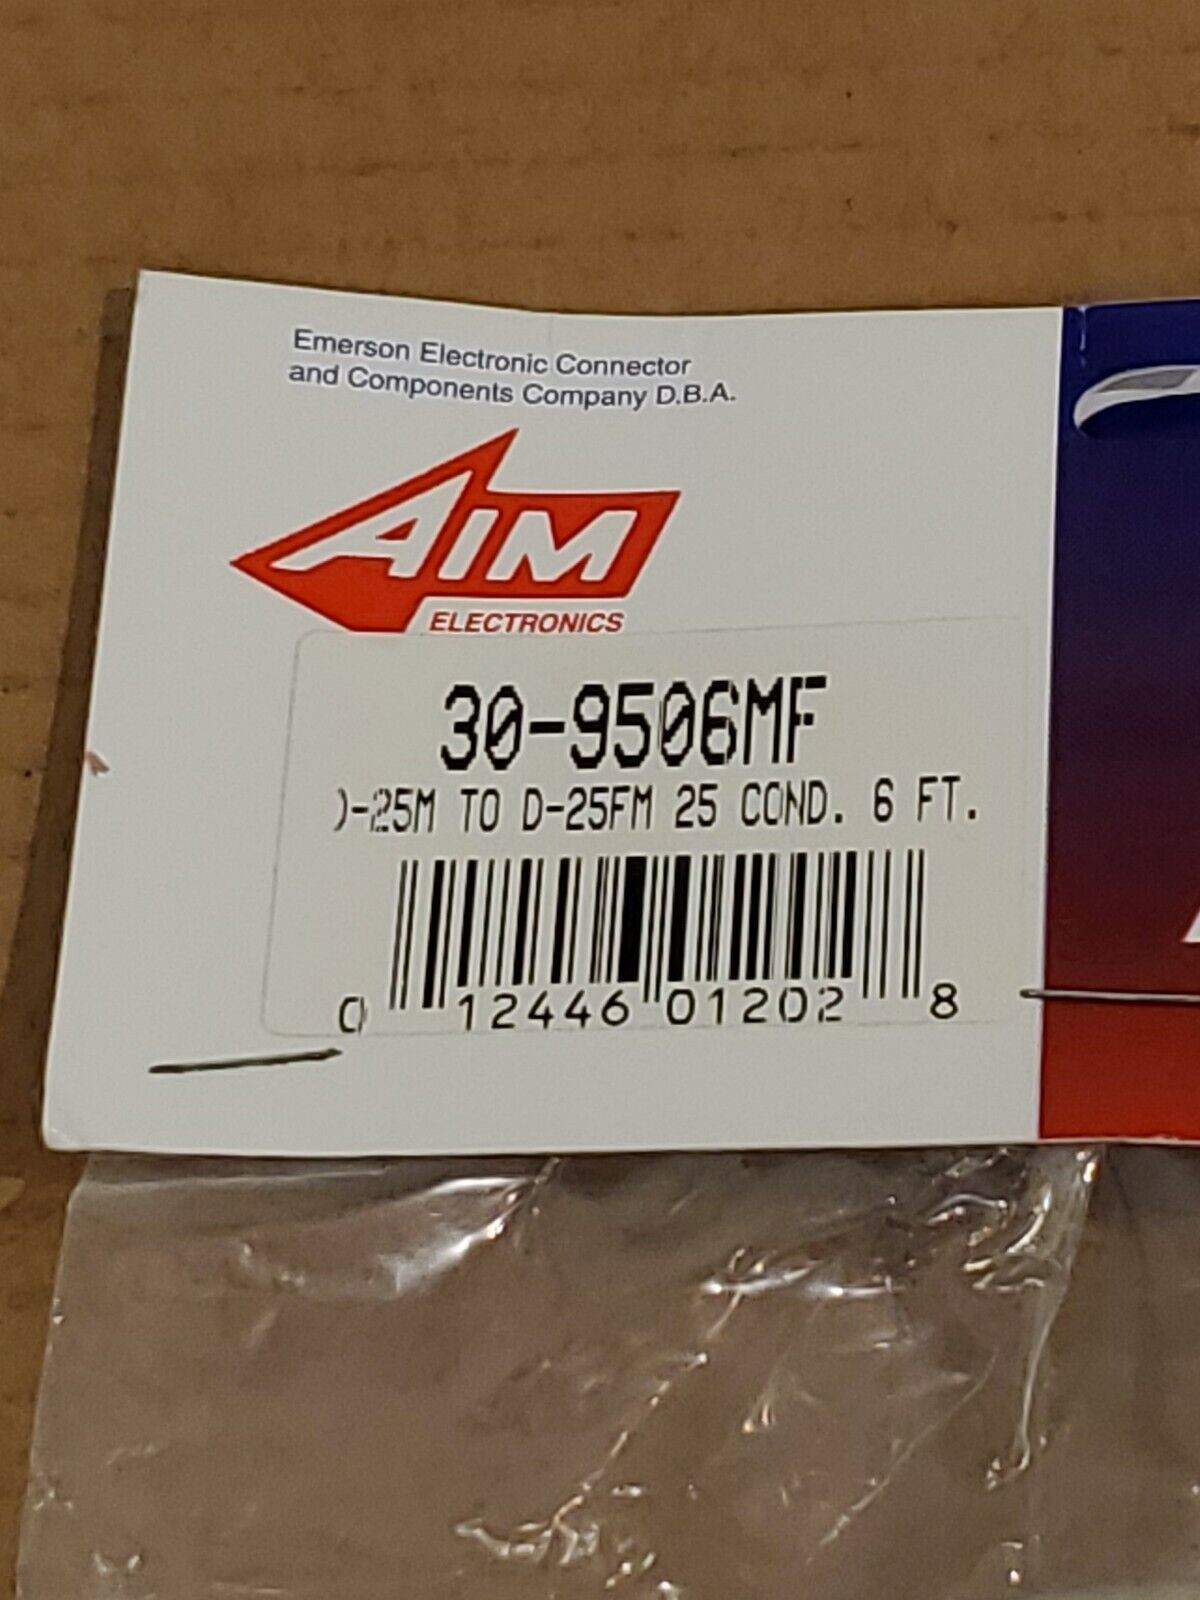 AIM Emerson Cable 30-9506MF D-25M To D-25FM 25 Cond 6 FT Feet Fully Shielded.